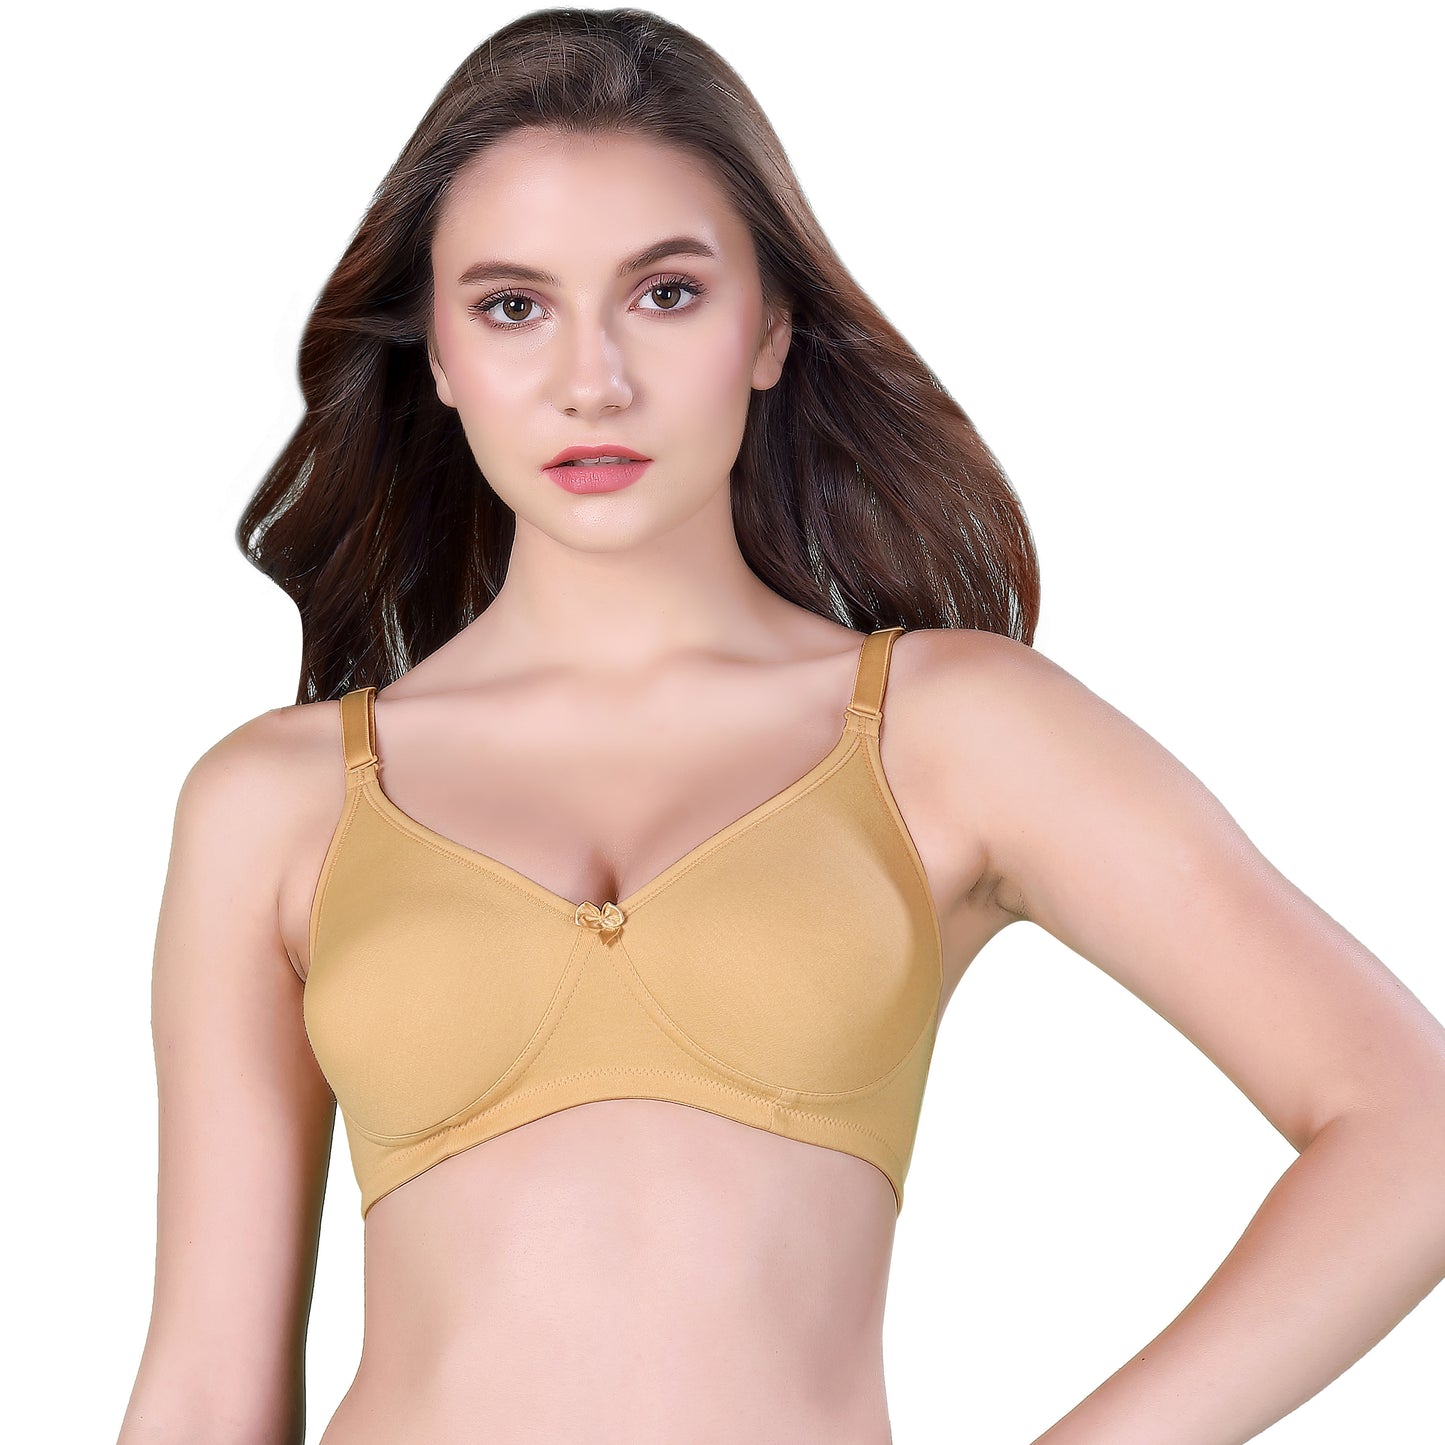 MUSE BRA / B & D CUP / NON-PADDED / NON-WIRED / LIGHTLY PADDED / FULL CUP BRA